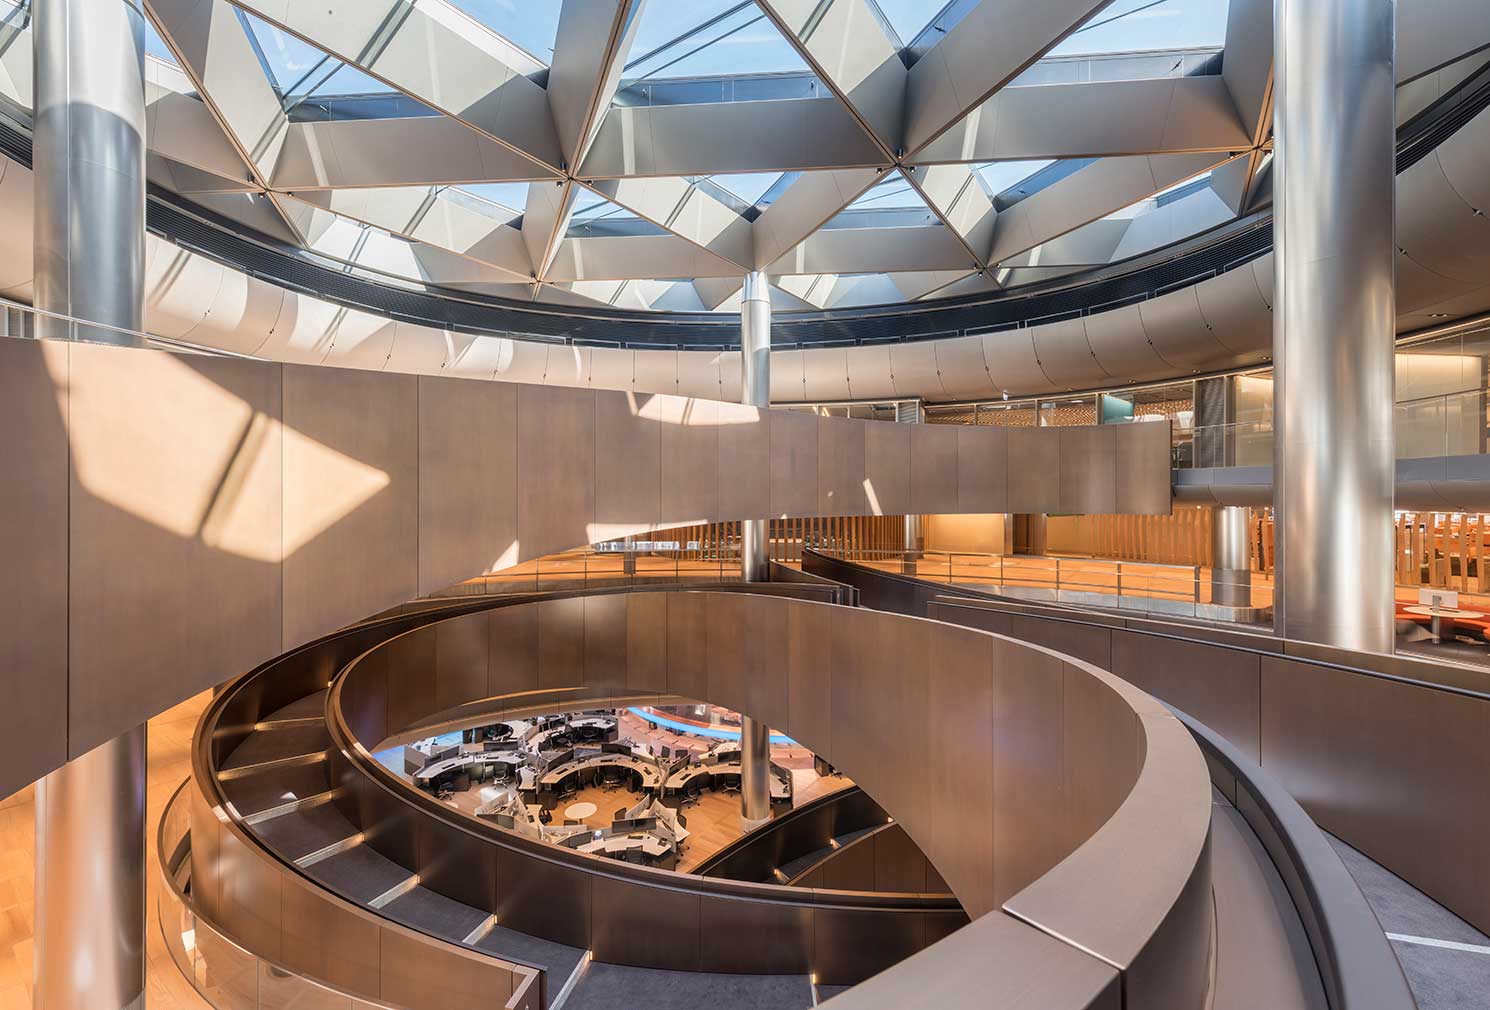 Foster + Partners have scooped the RIBA Stirling Prize for their Bloomberg HQ